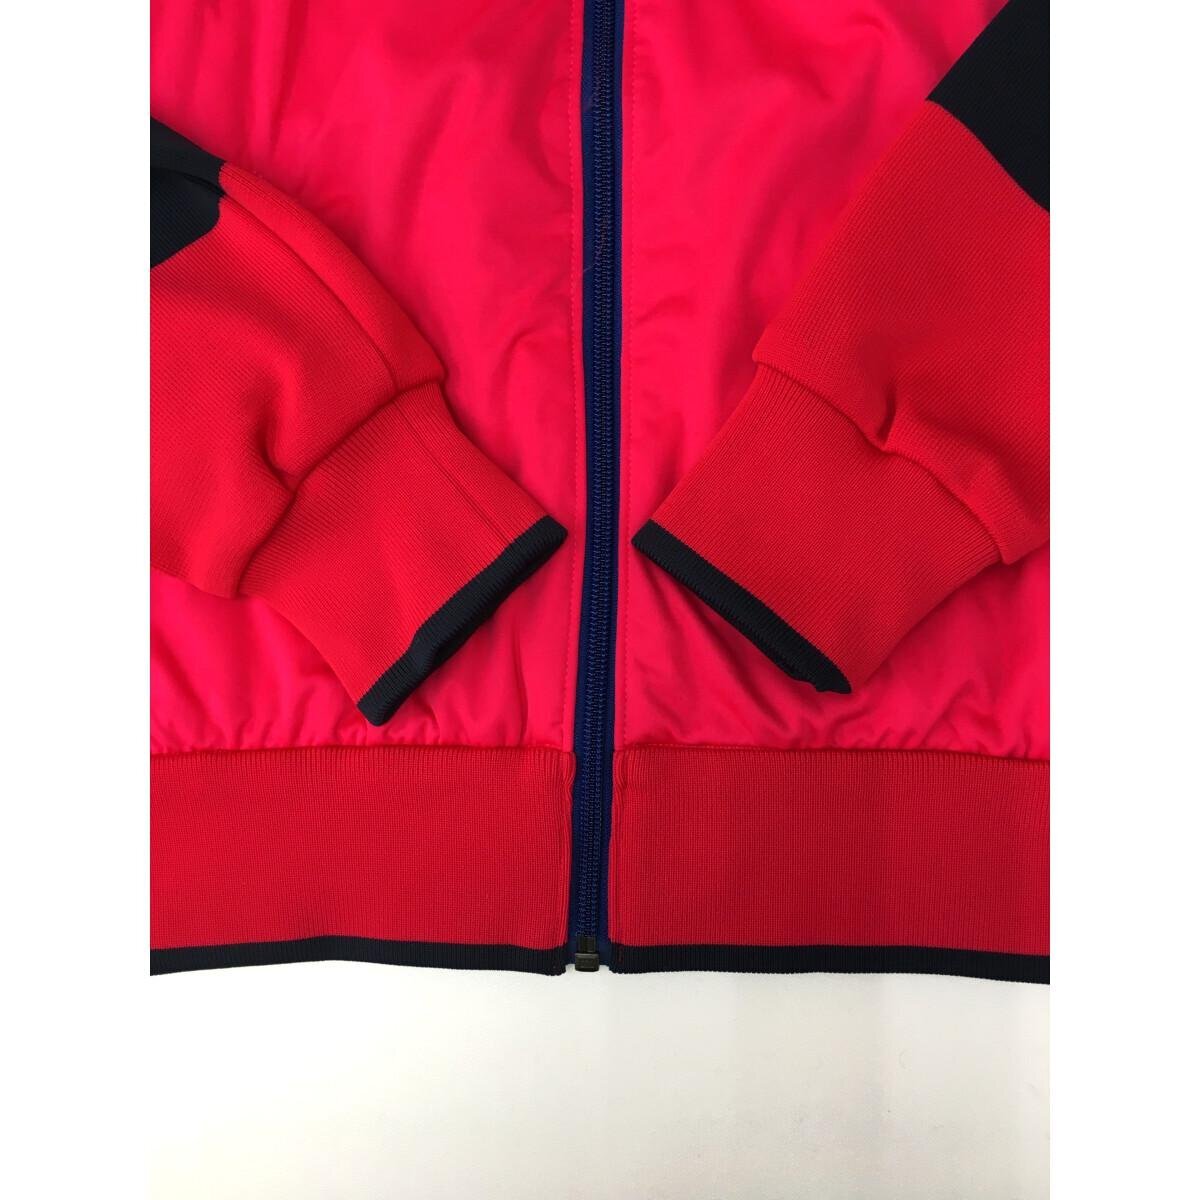 coco* Le Coq * long sleeve full Zip blouson * Wind material / knitted * pink × navy blue / border *M* used * letter pack post service plus shipping possible *87645